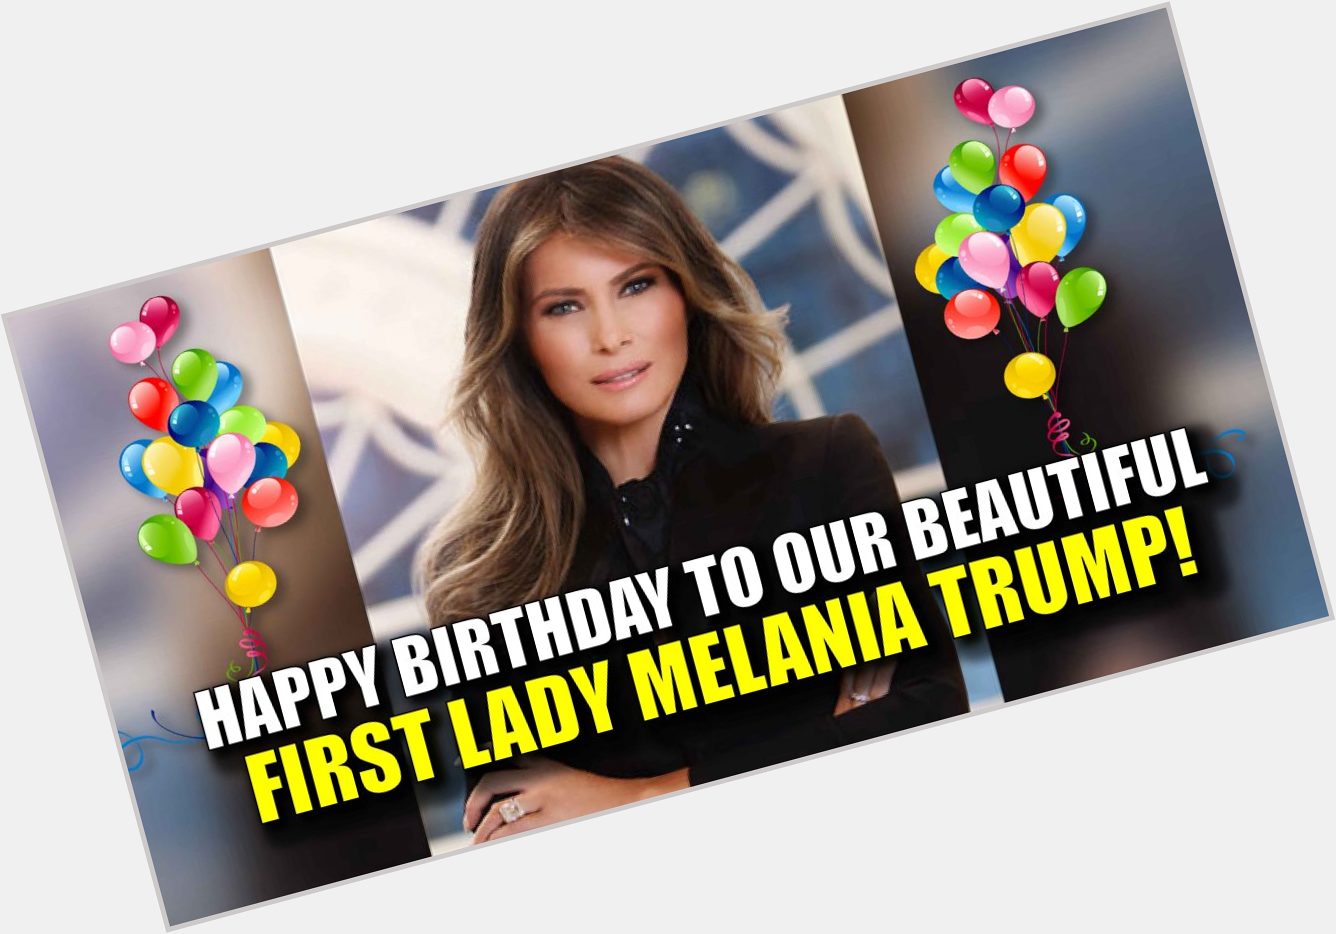 Happy Birthday to Our Beautiful First Lady Melania Trump!  